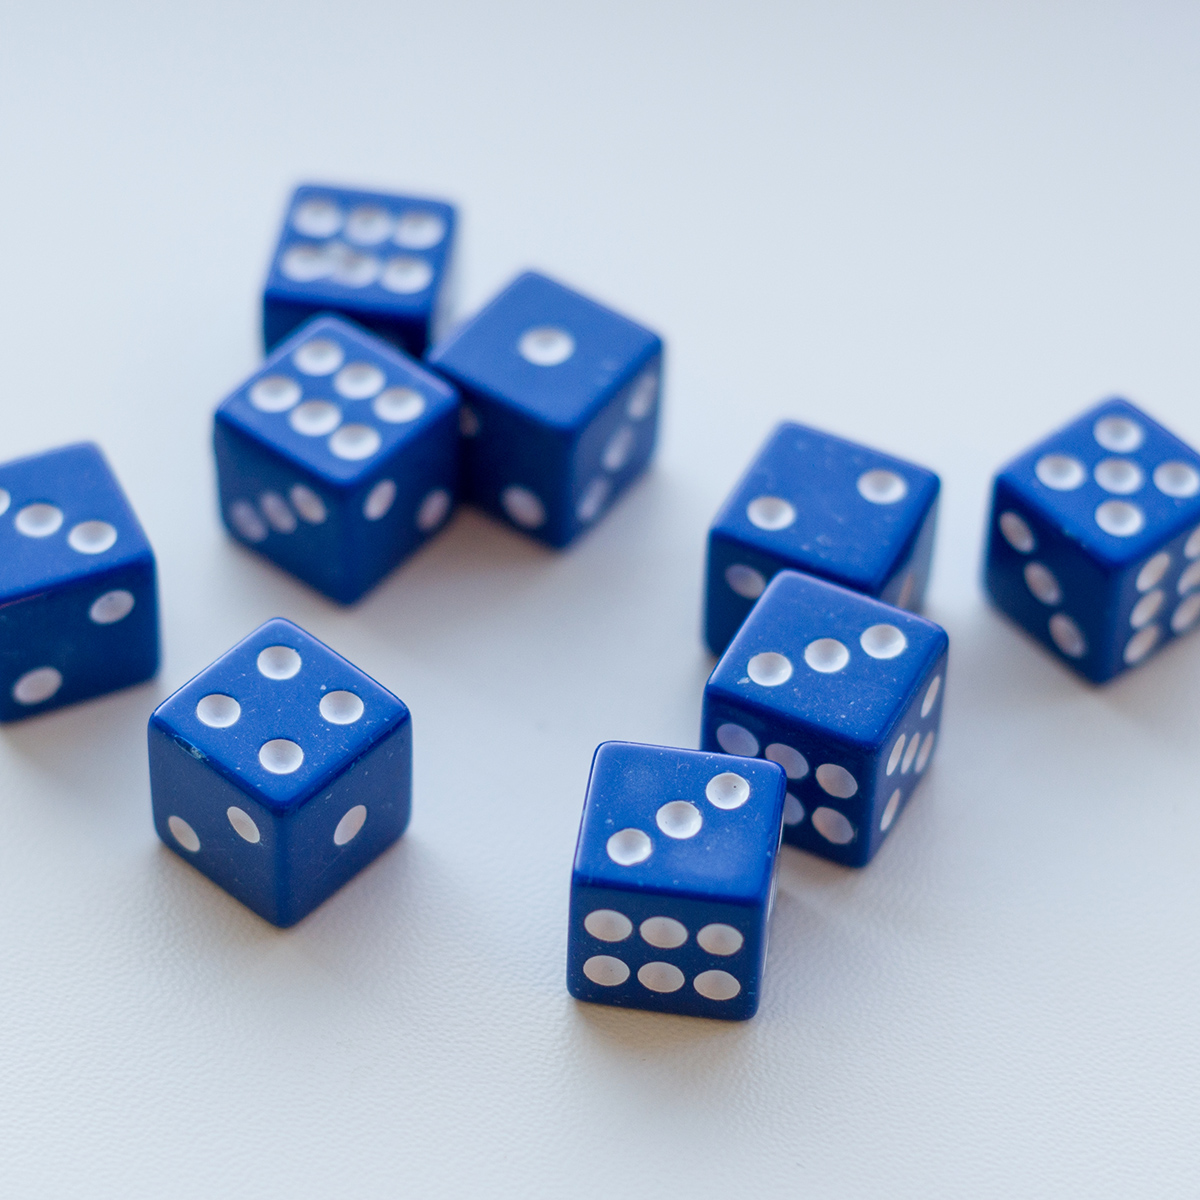 six-sided dice on tabletop